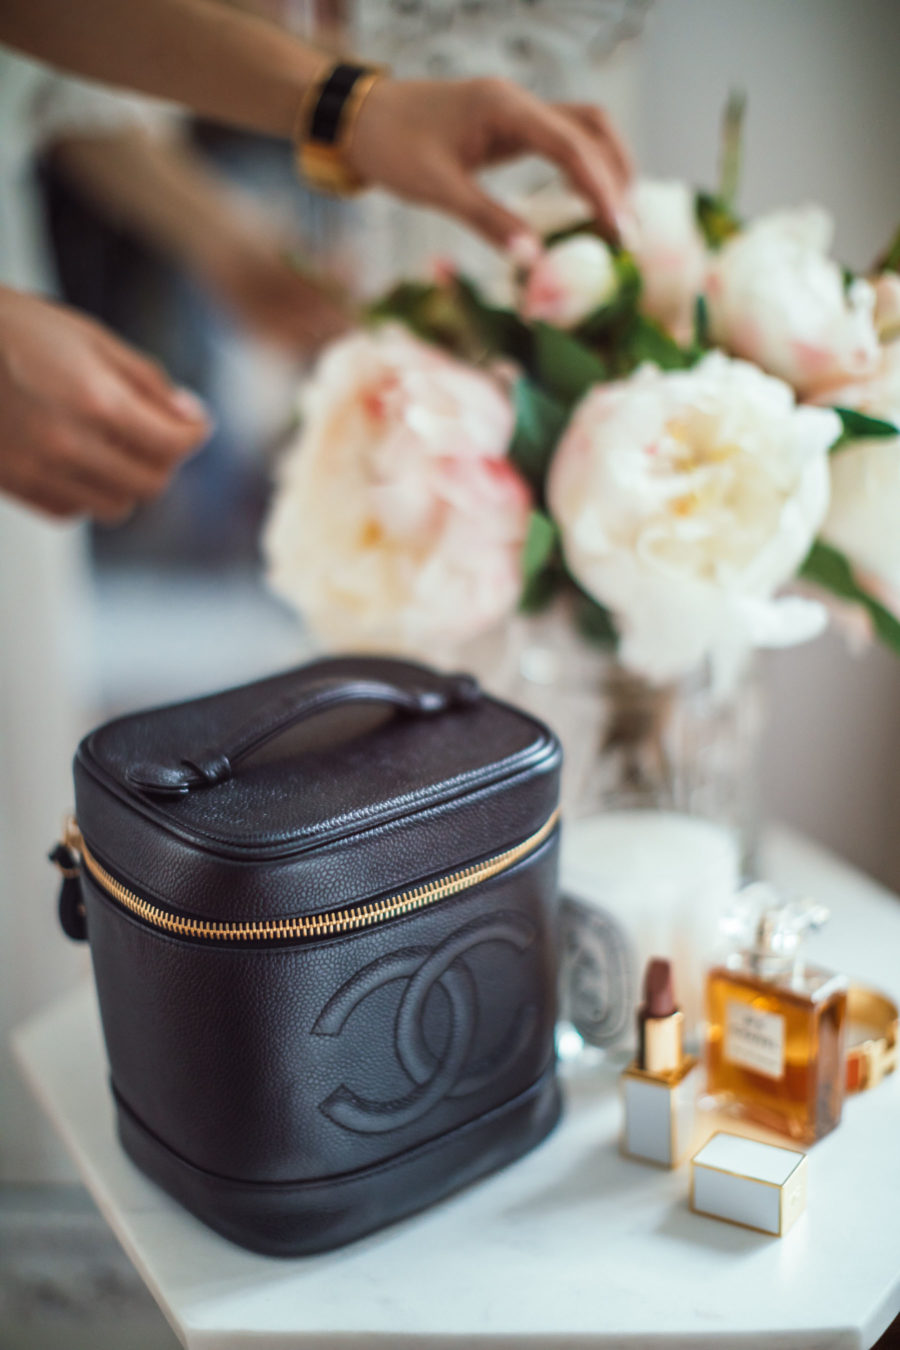 my top beauty picks from the 2020 nordstrom anniversary sale - Chanel Vanity Bag, chanel perfume, fragrances // Jessica Wang - Notjessfashion.com